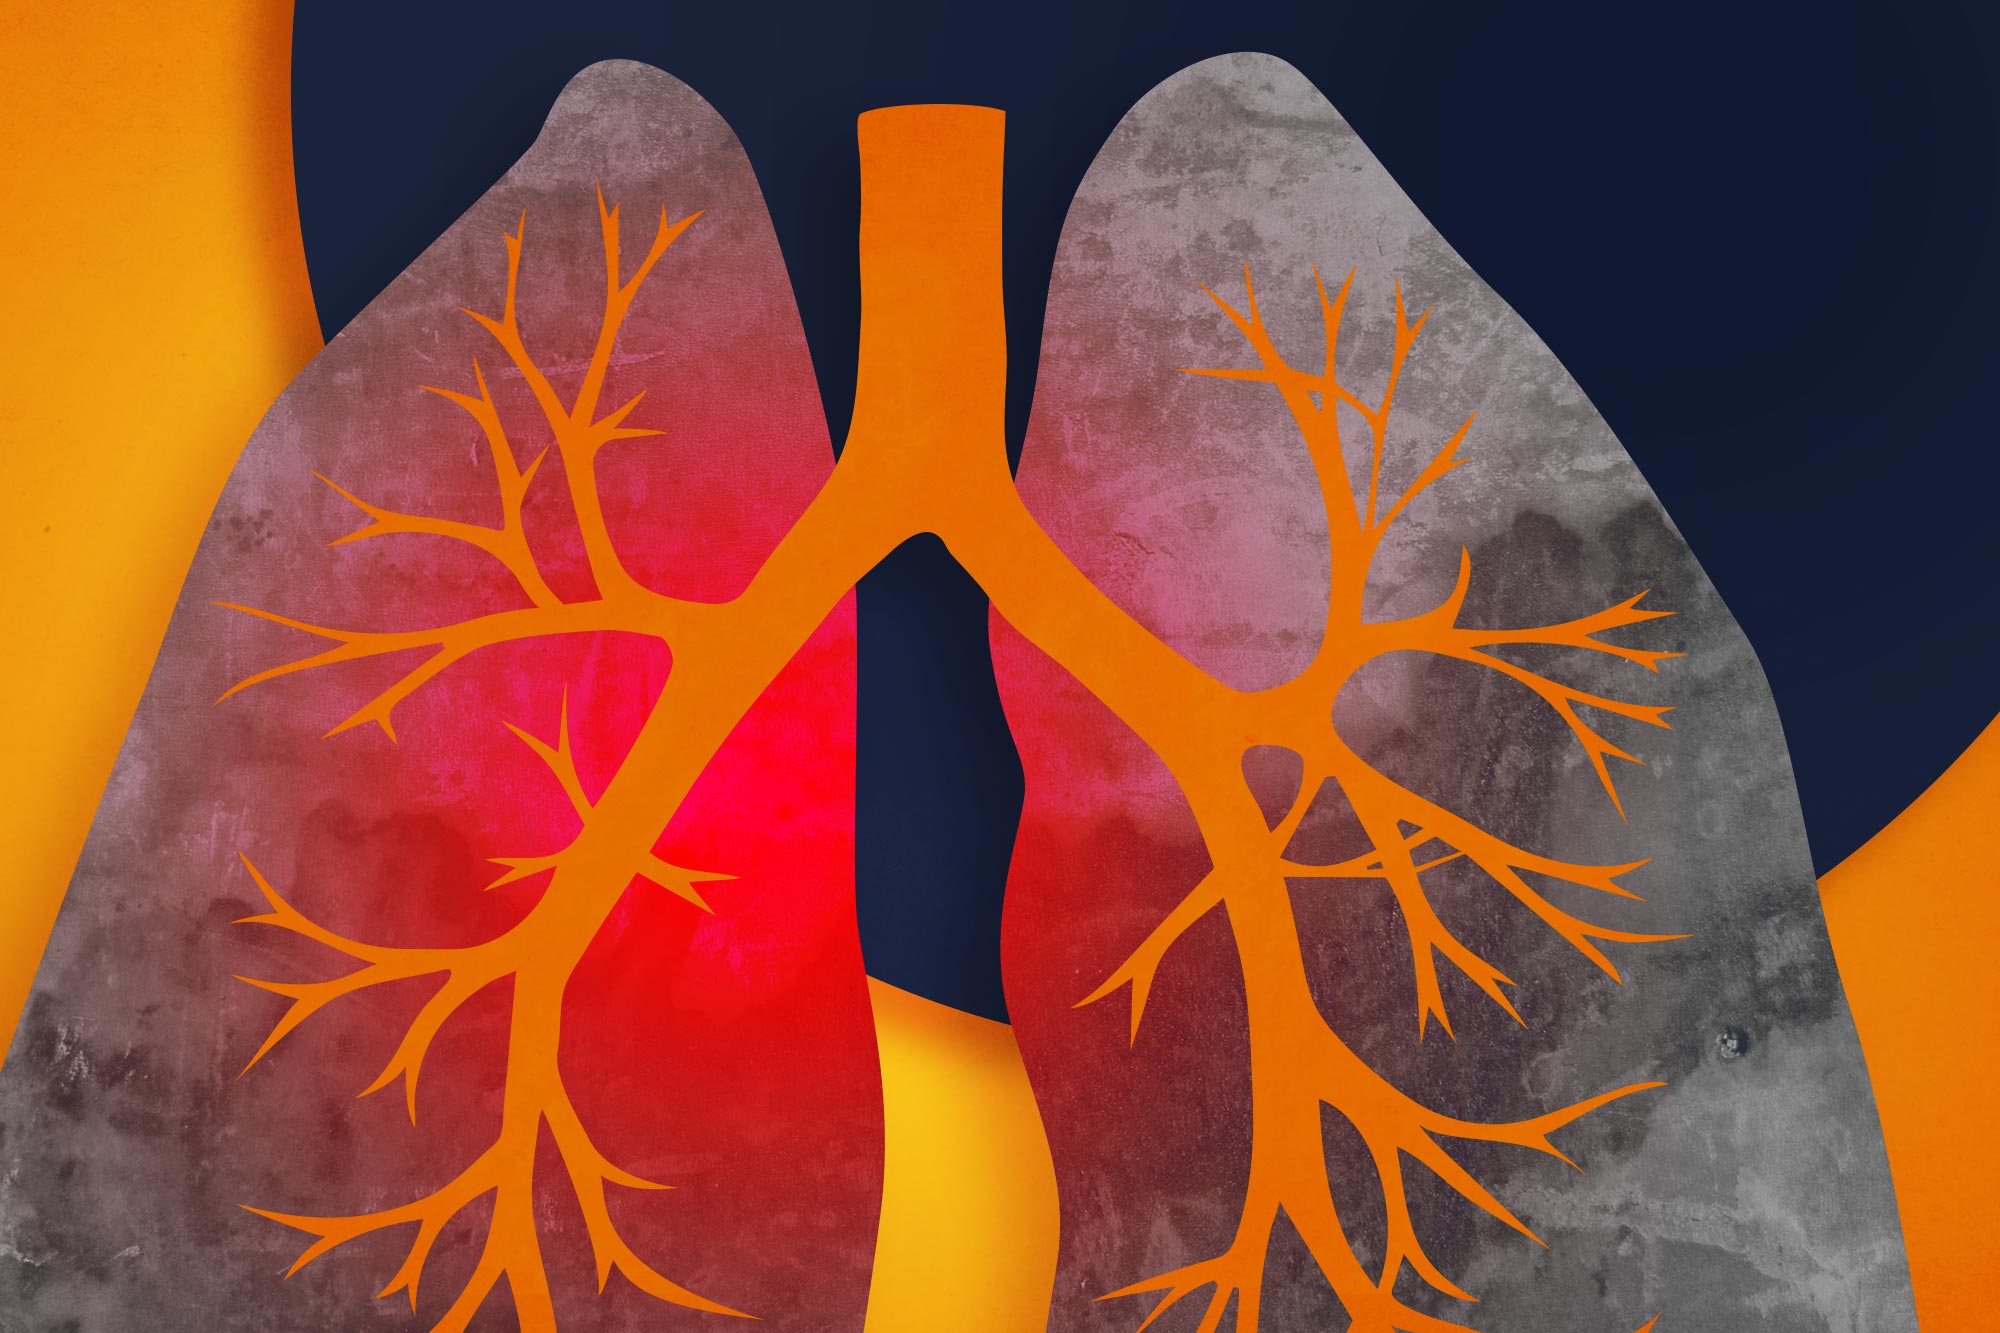 illustration of lungs with bright red on the left lung